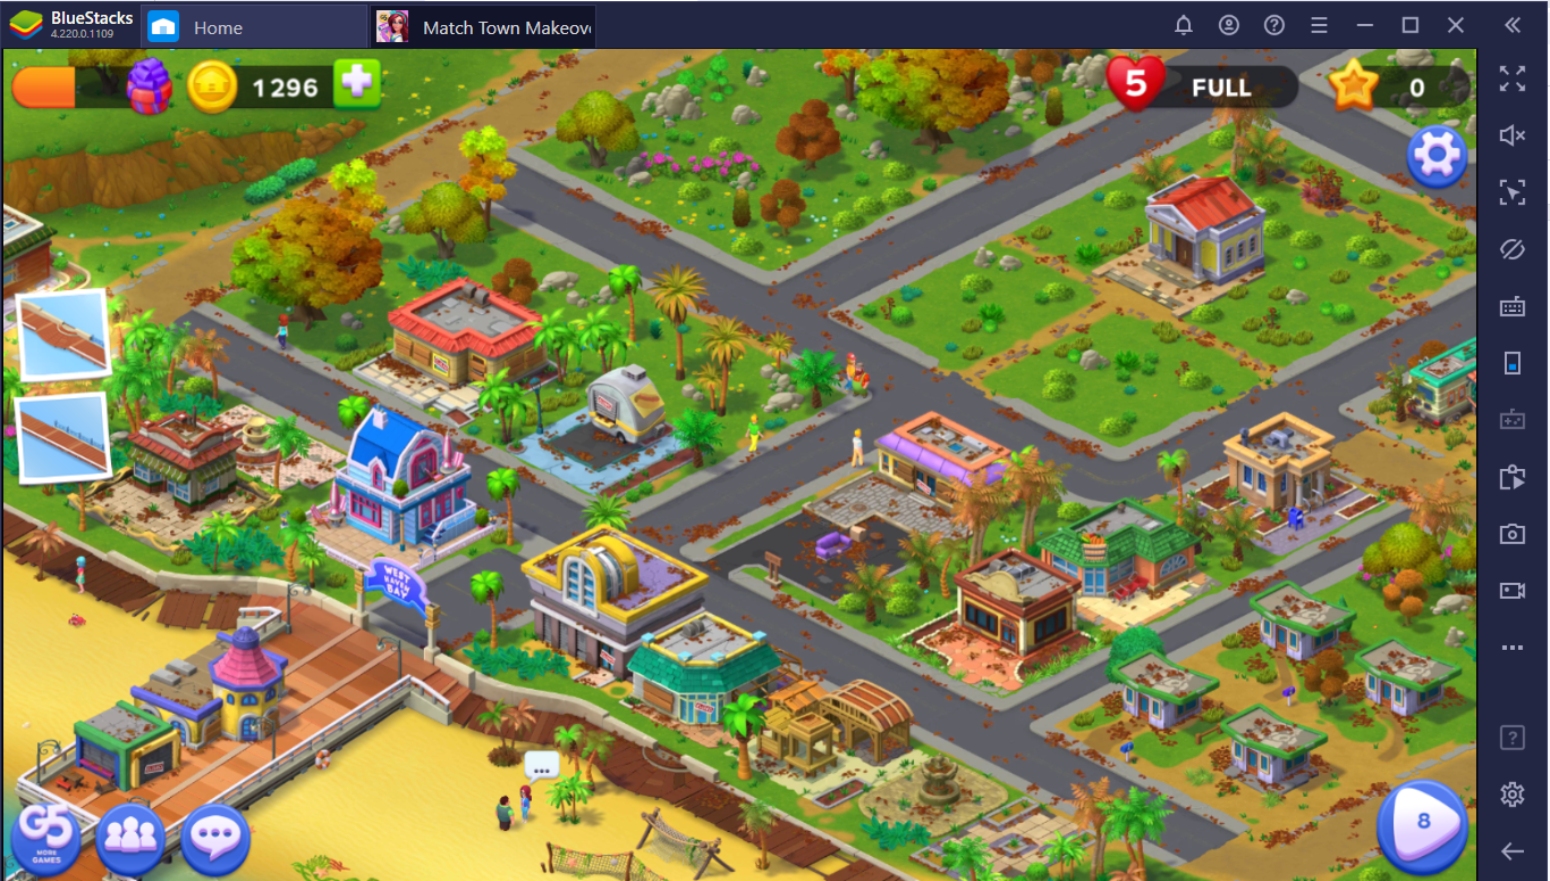 Beginners Guide To Match Town Makeover Bluestacks